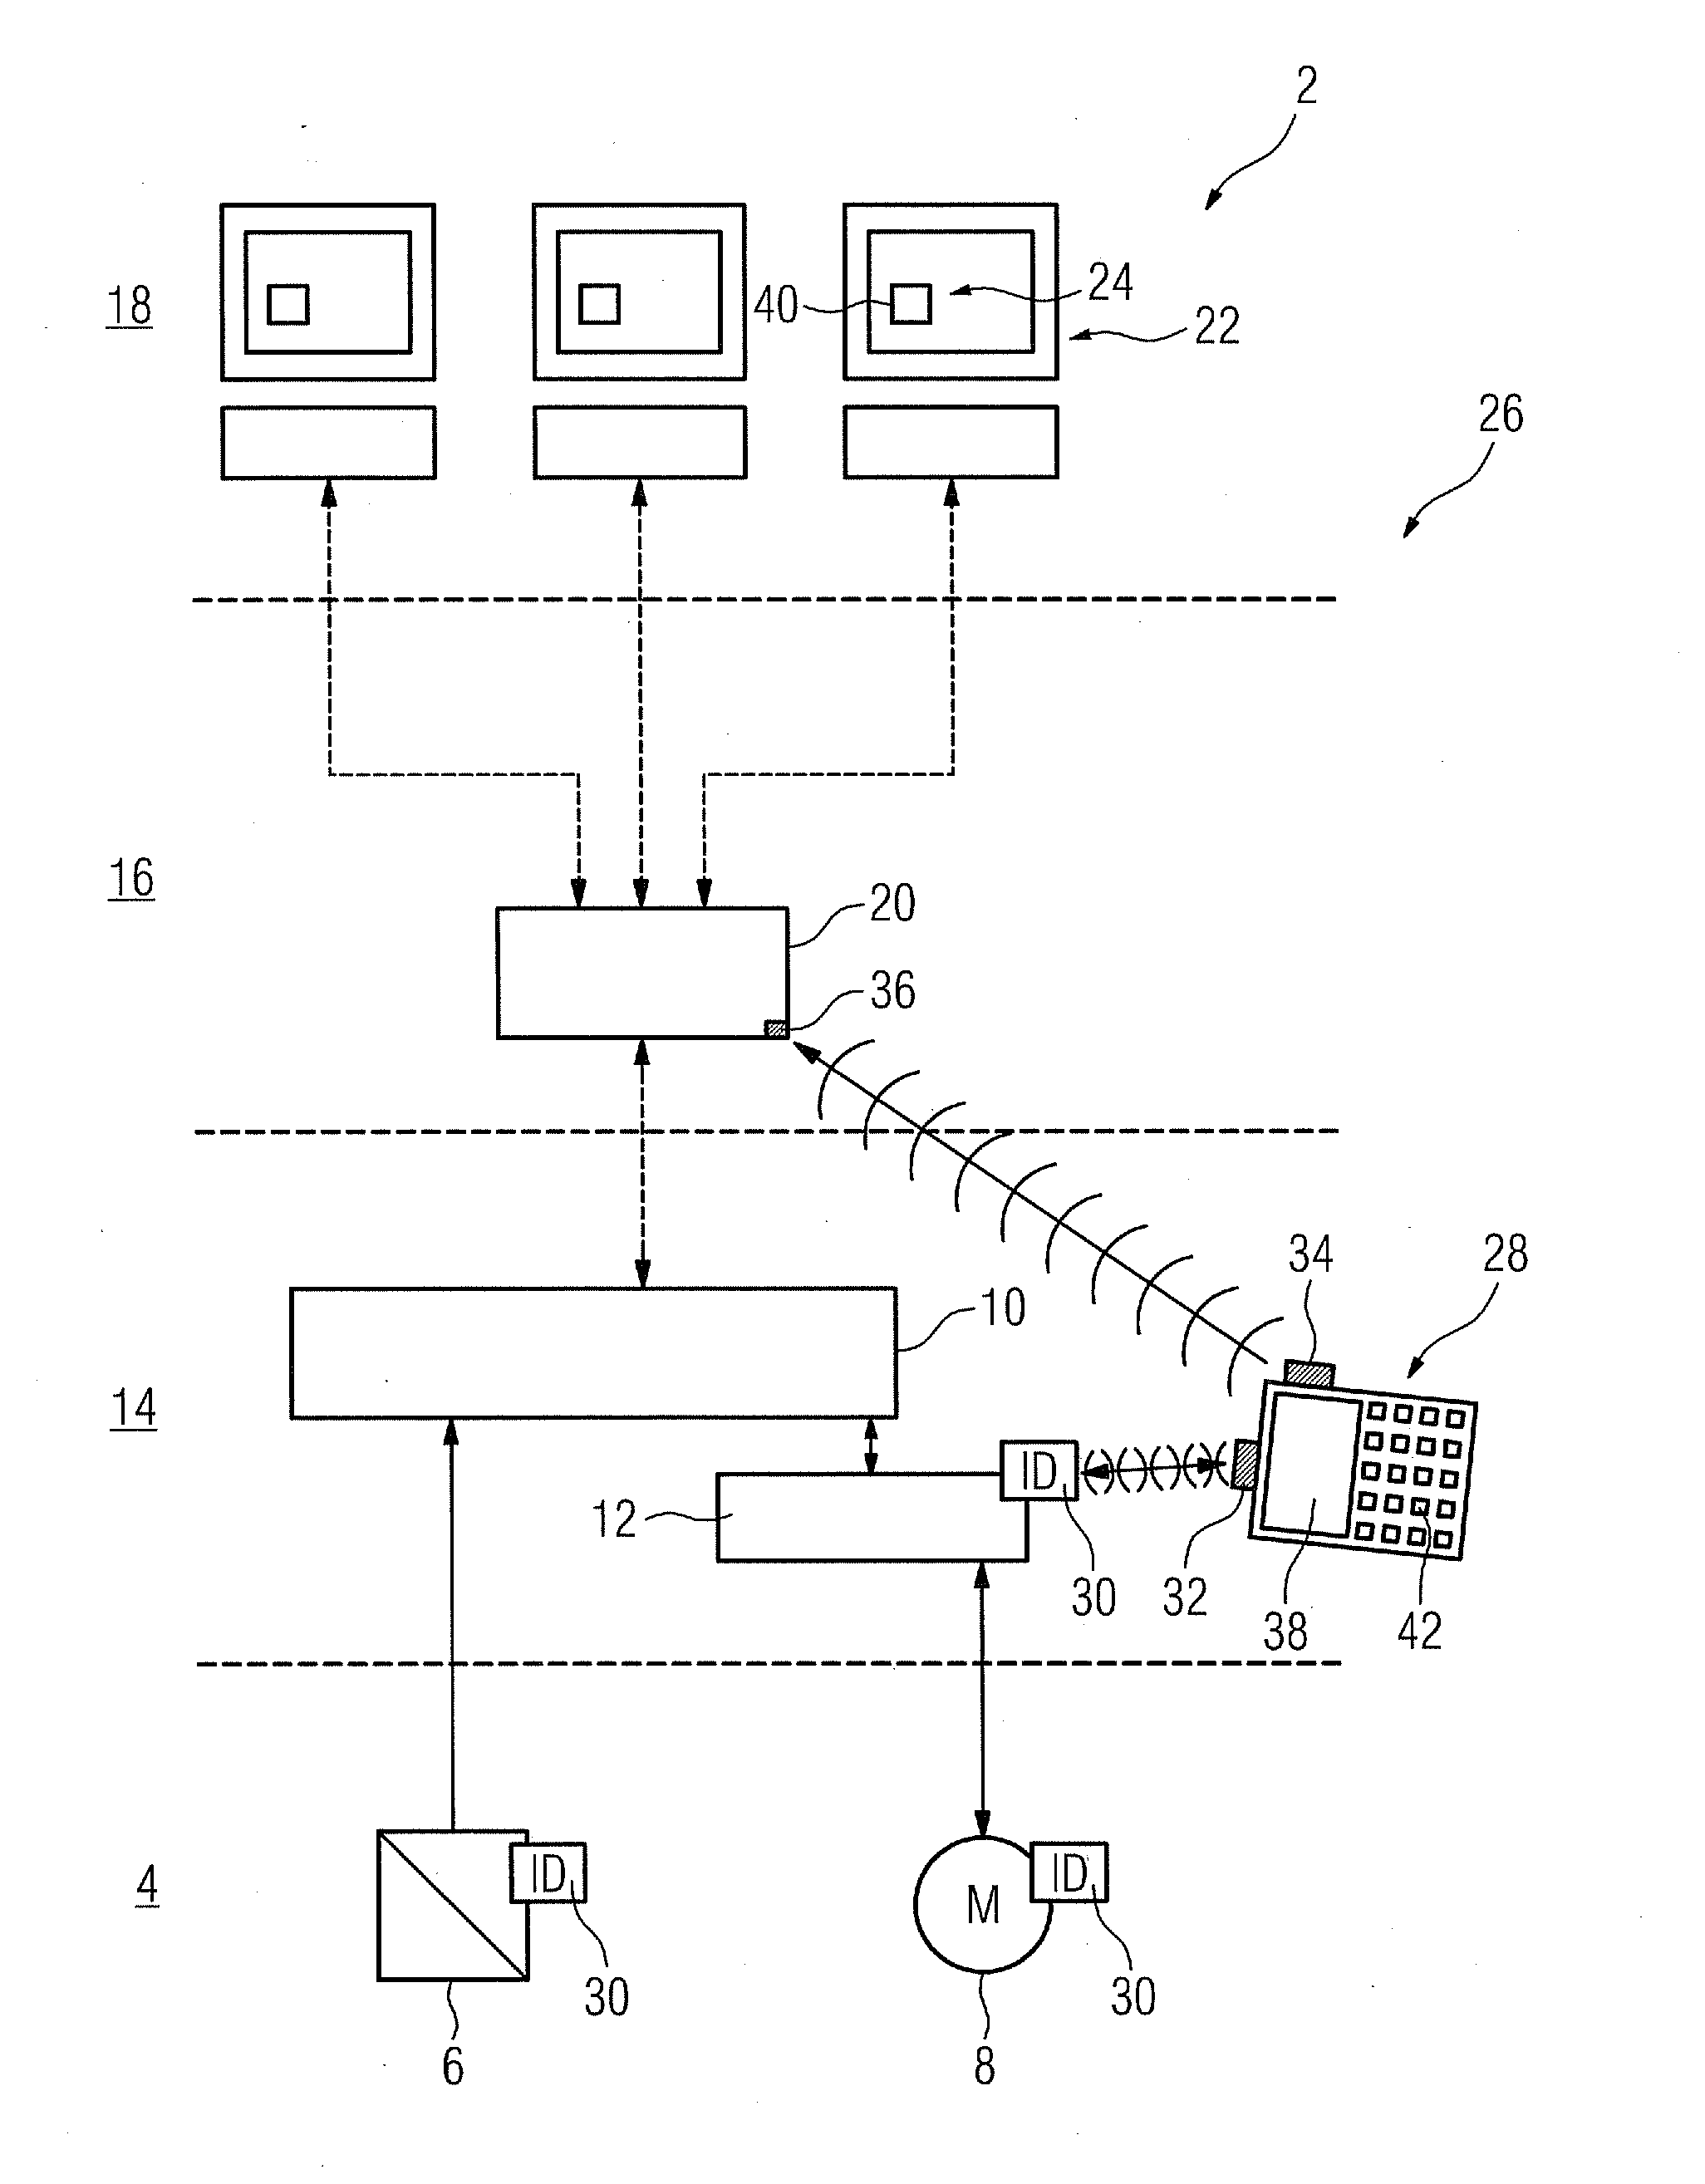 Method for Isolating a Plant Device of an Industrial Plant